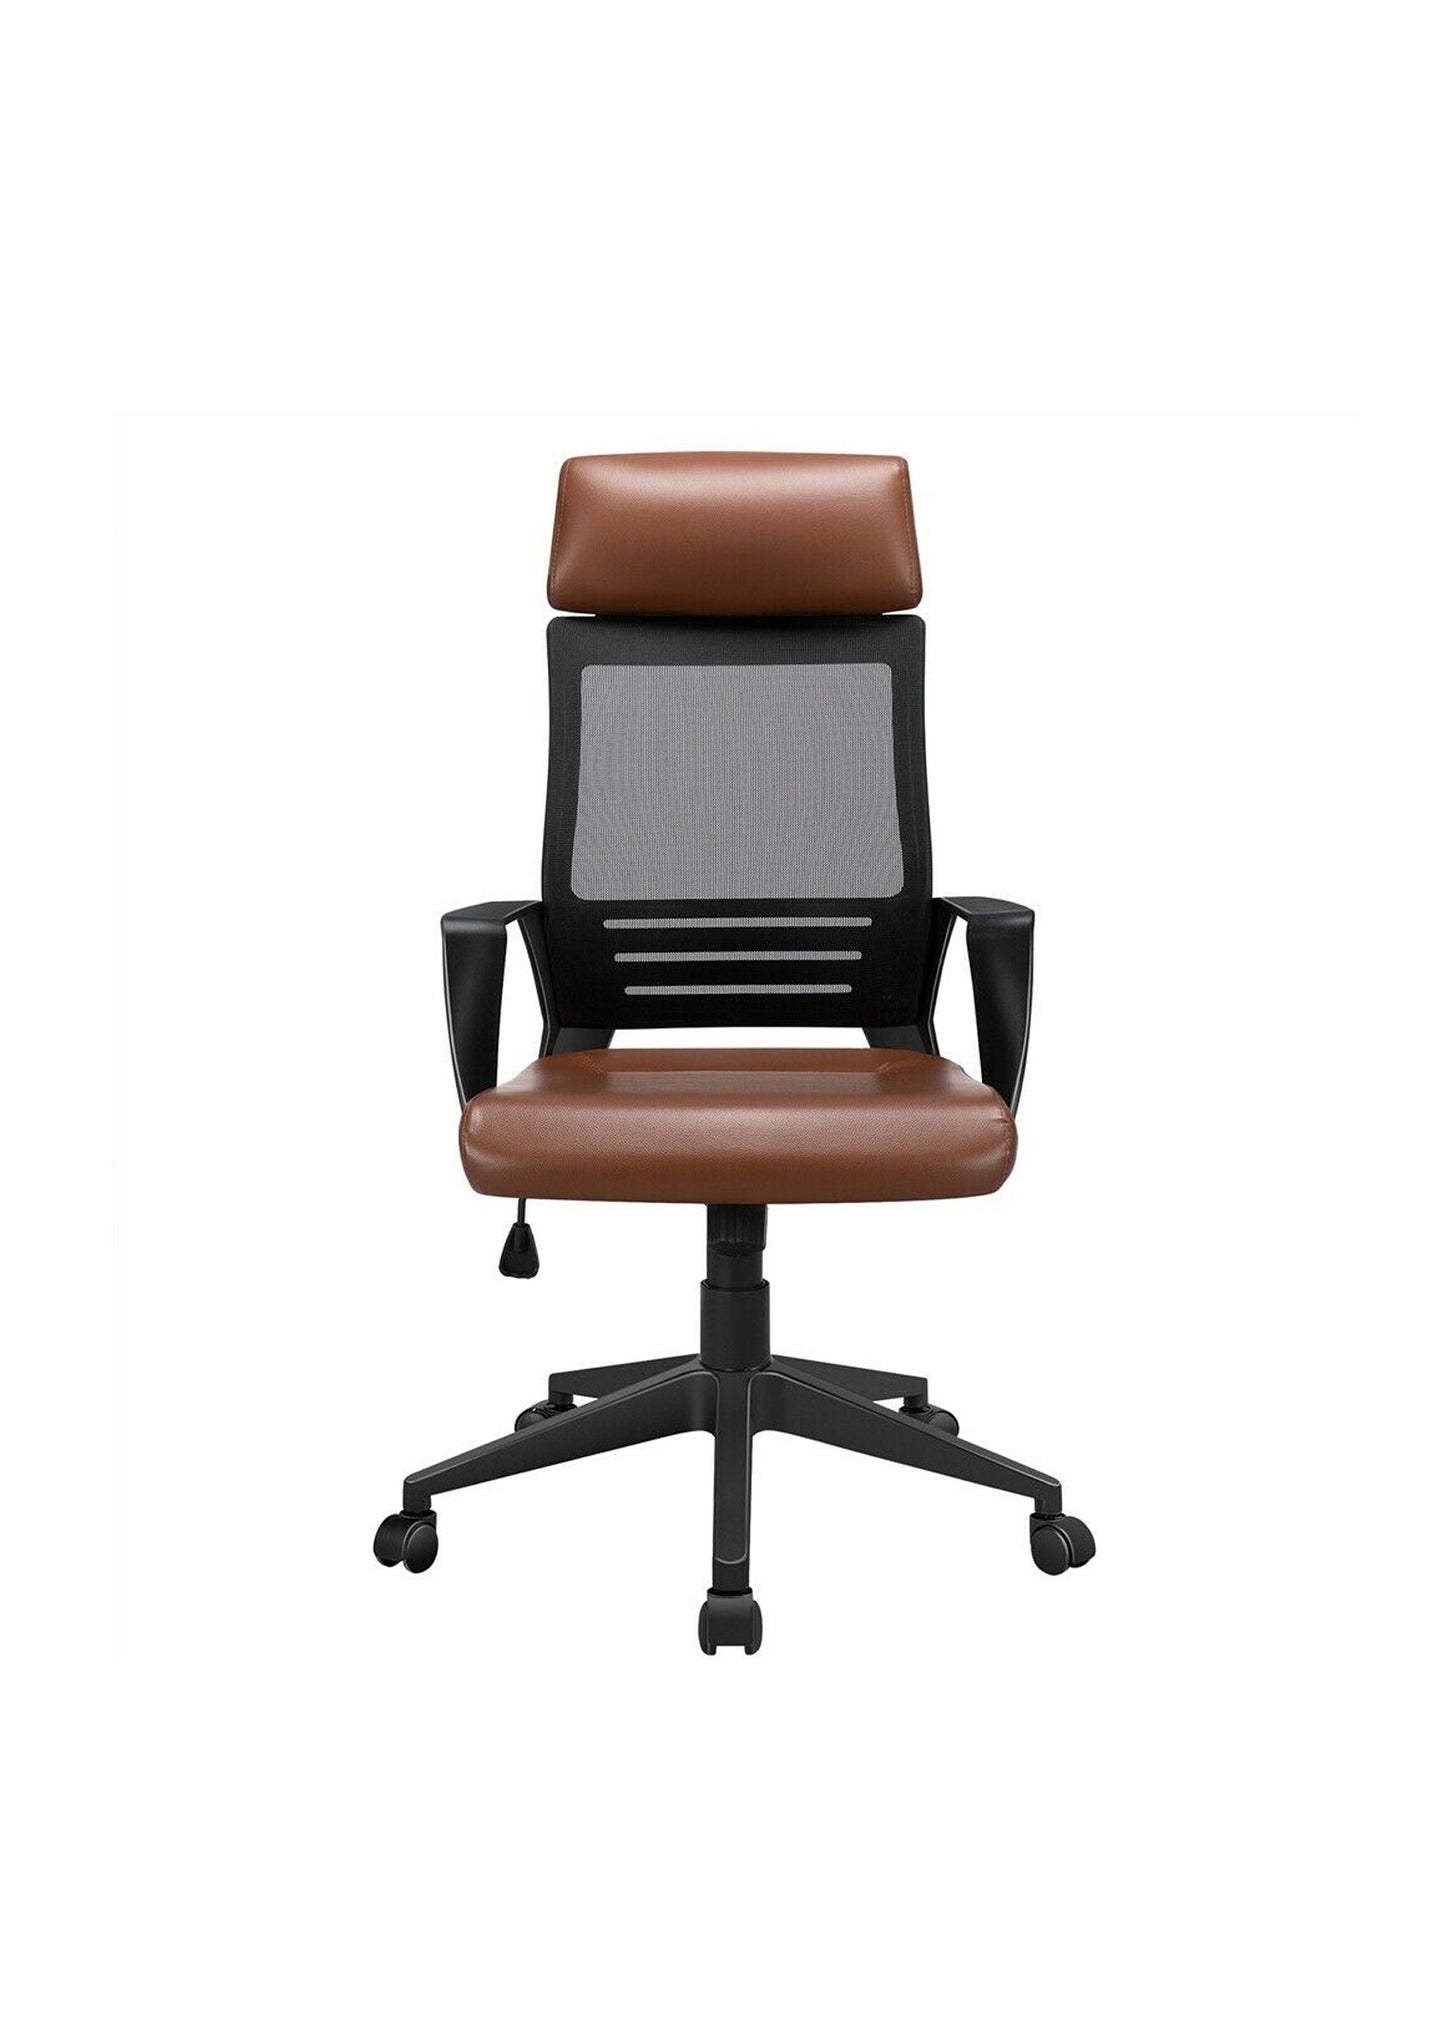 PU Leather and Mesh swivel adjustable office / desk chair